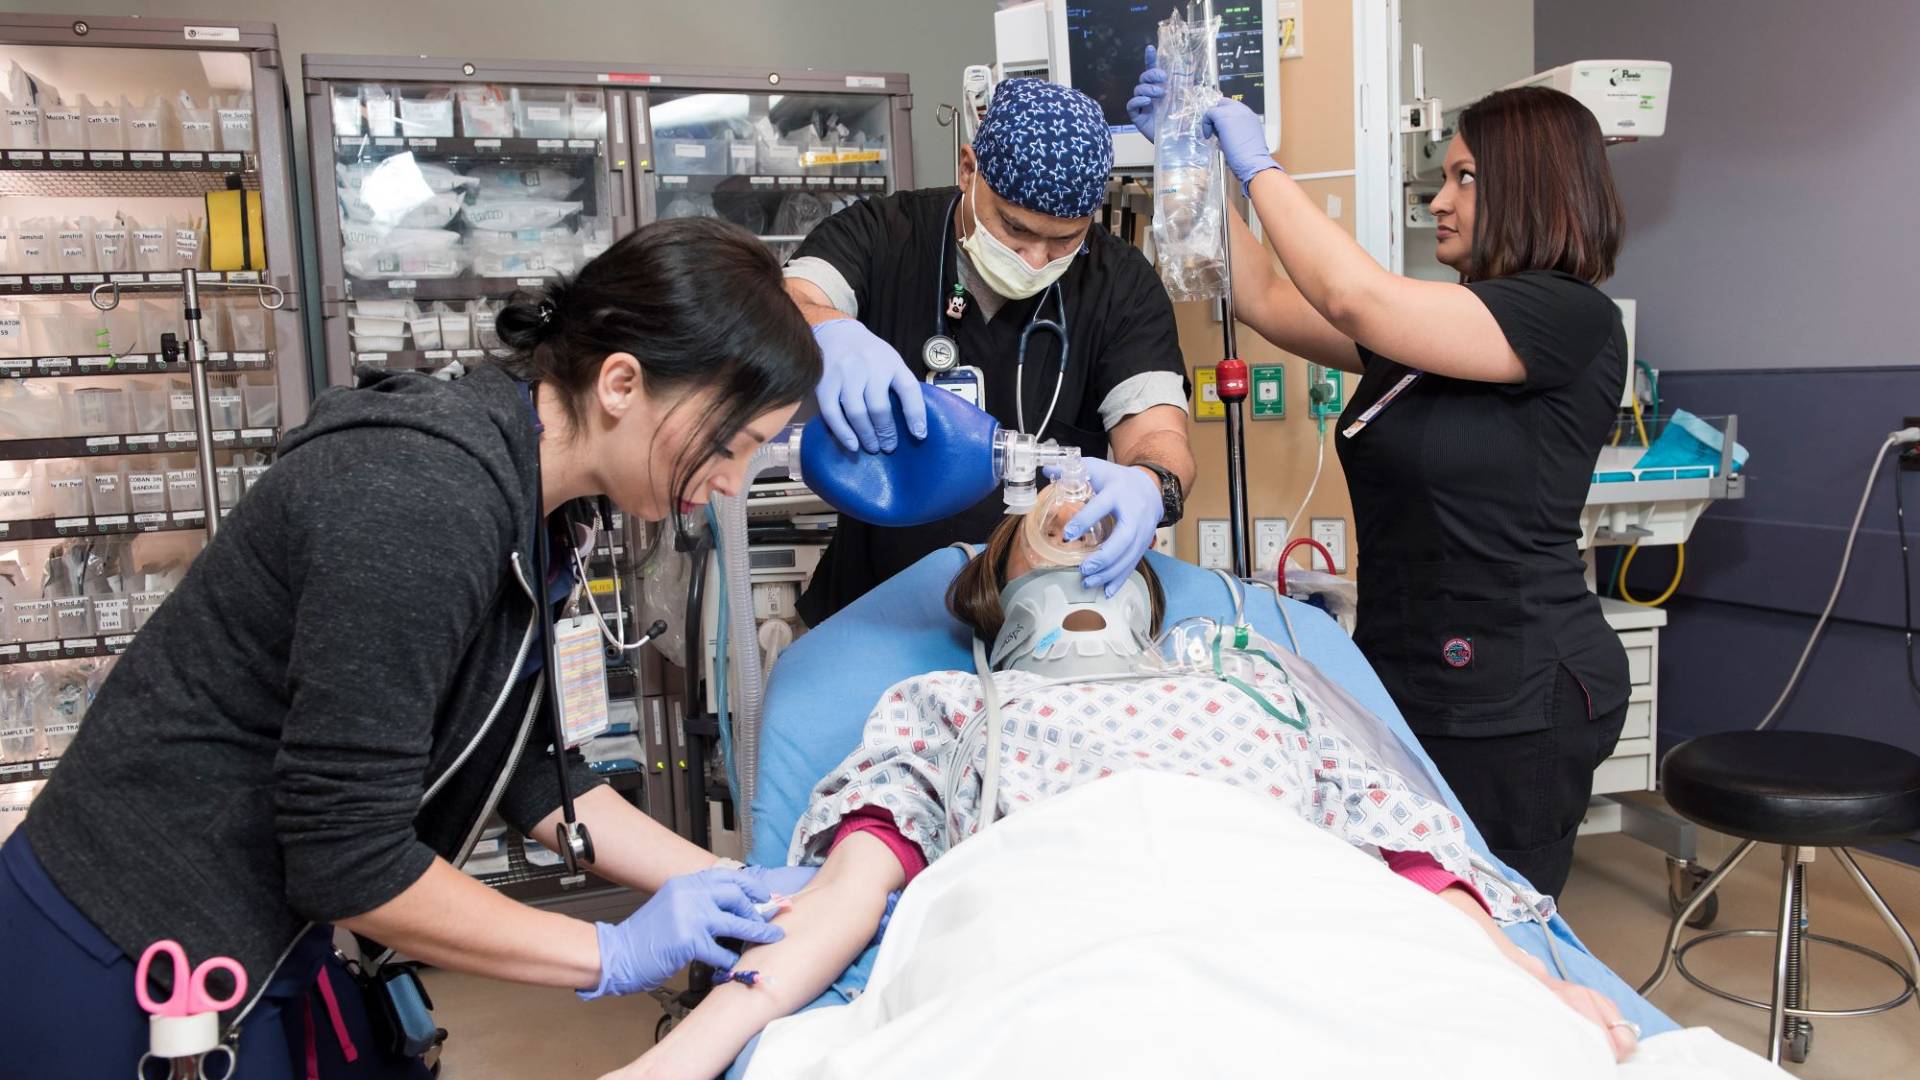 Group of students in an emergency room simulation.